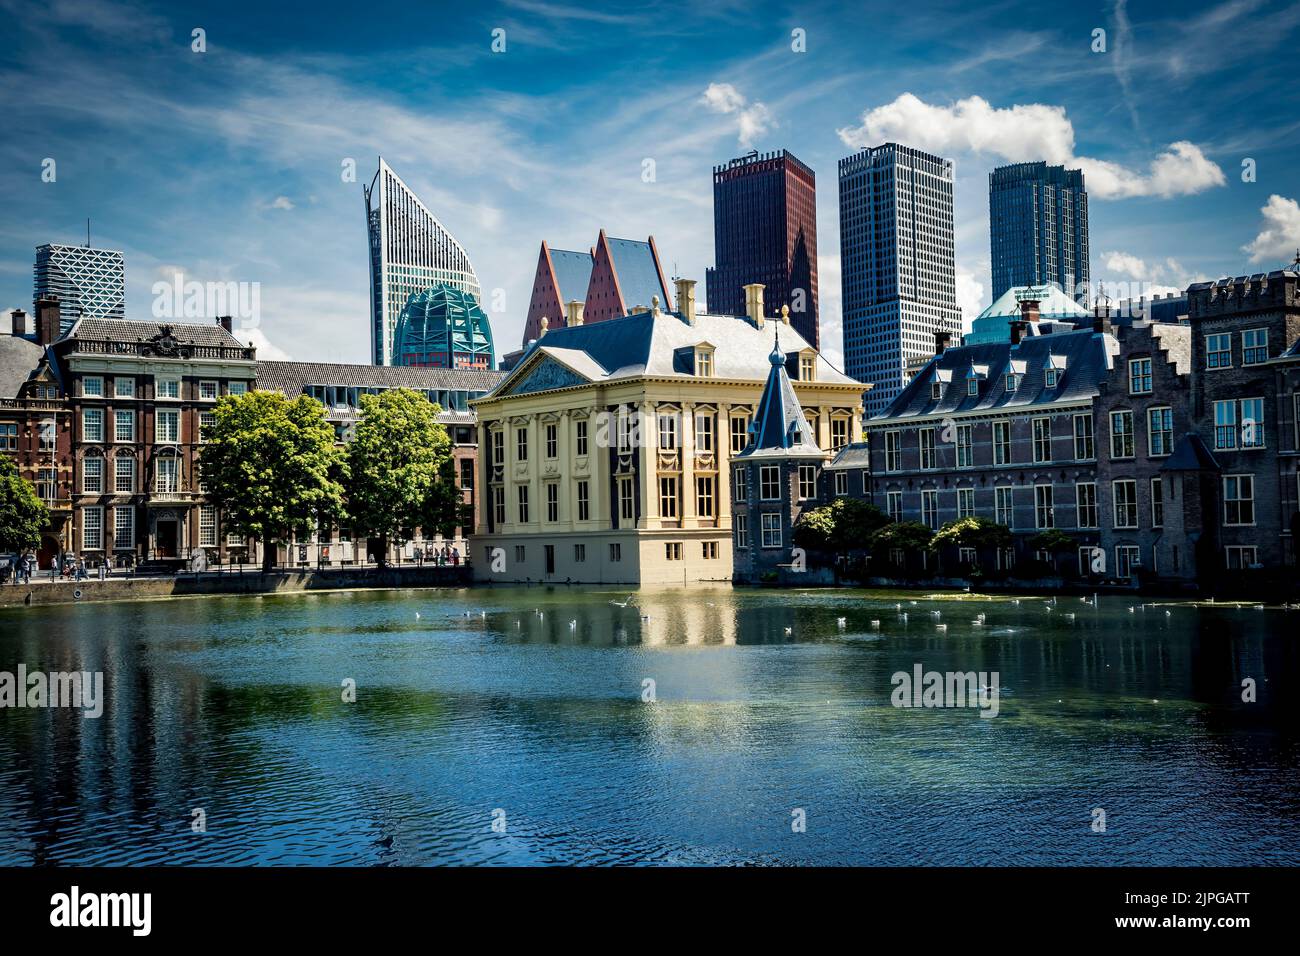 Modern and traditional buildings in the Hague Stock Photo